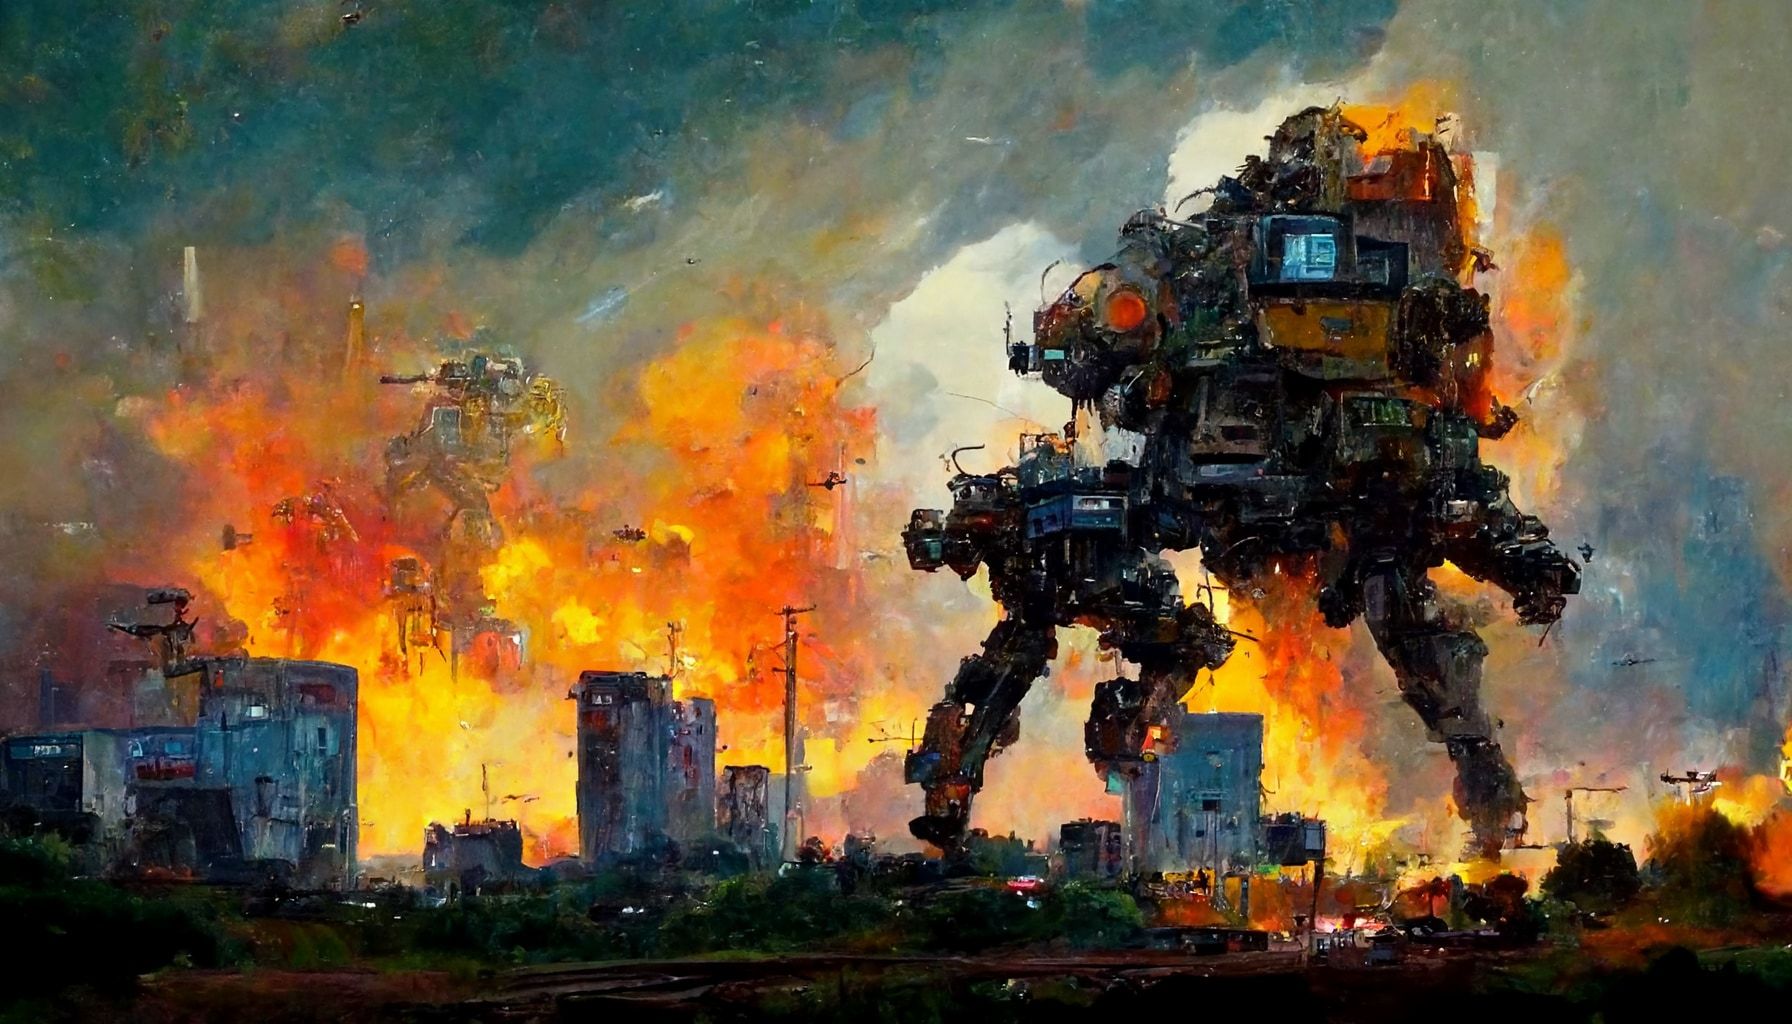 Terribleminds oil on canvas painting of a titanfall mech attack